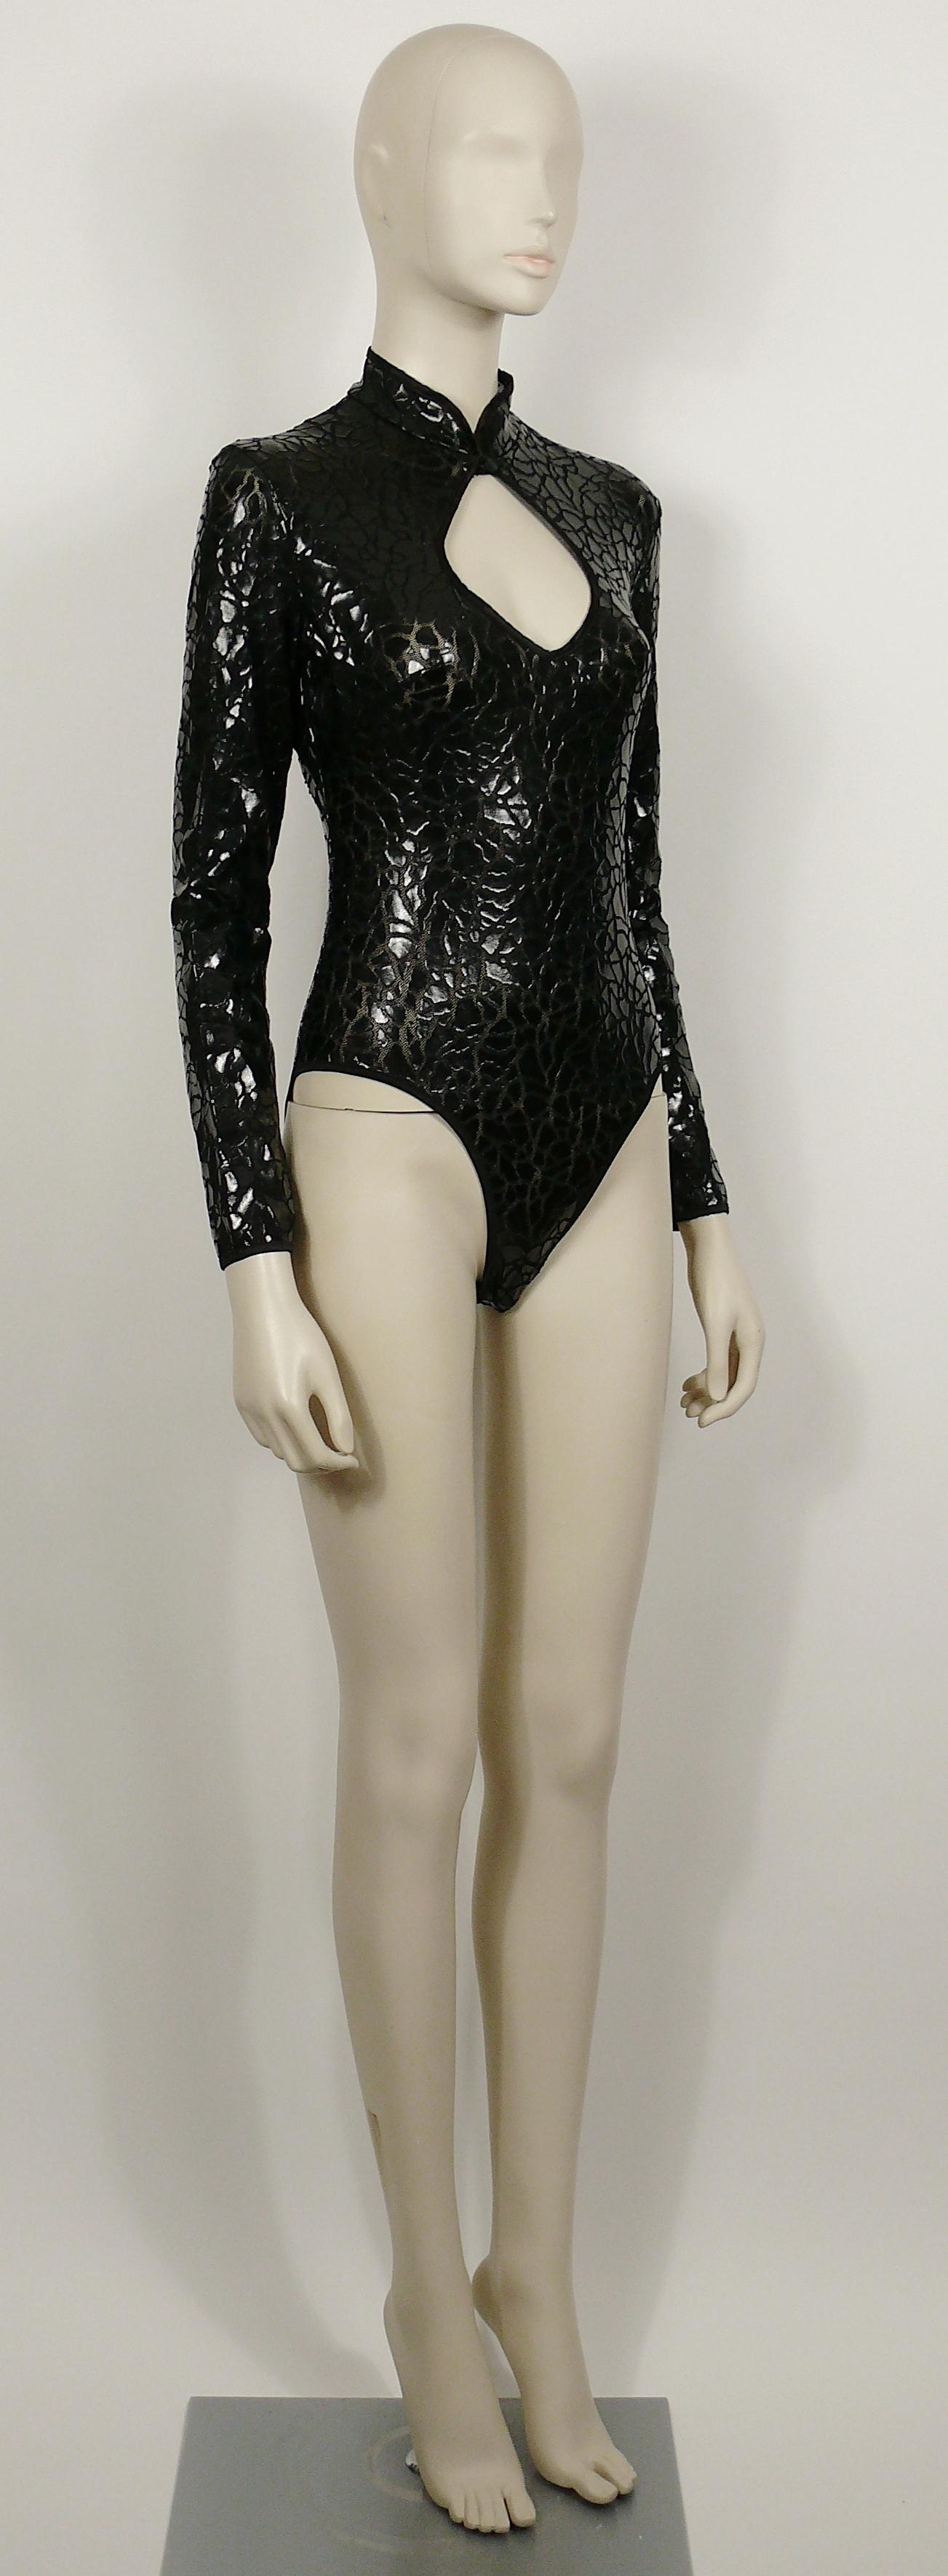 MUGLER vintage long-sleeve black mesh bodysuit featuring a crack design all over.

Back zippered closure.
Buttoned collar.

Label reads MUGLER.
Made in Italy.

Size tag reads : M.
Please check measurements.

Composition tag reads : 100% Nylon.
